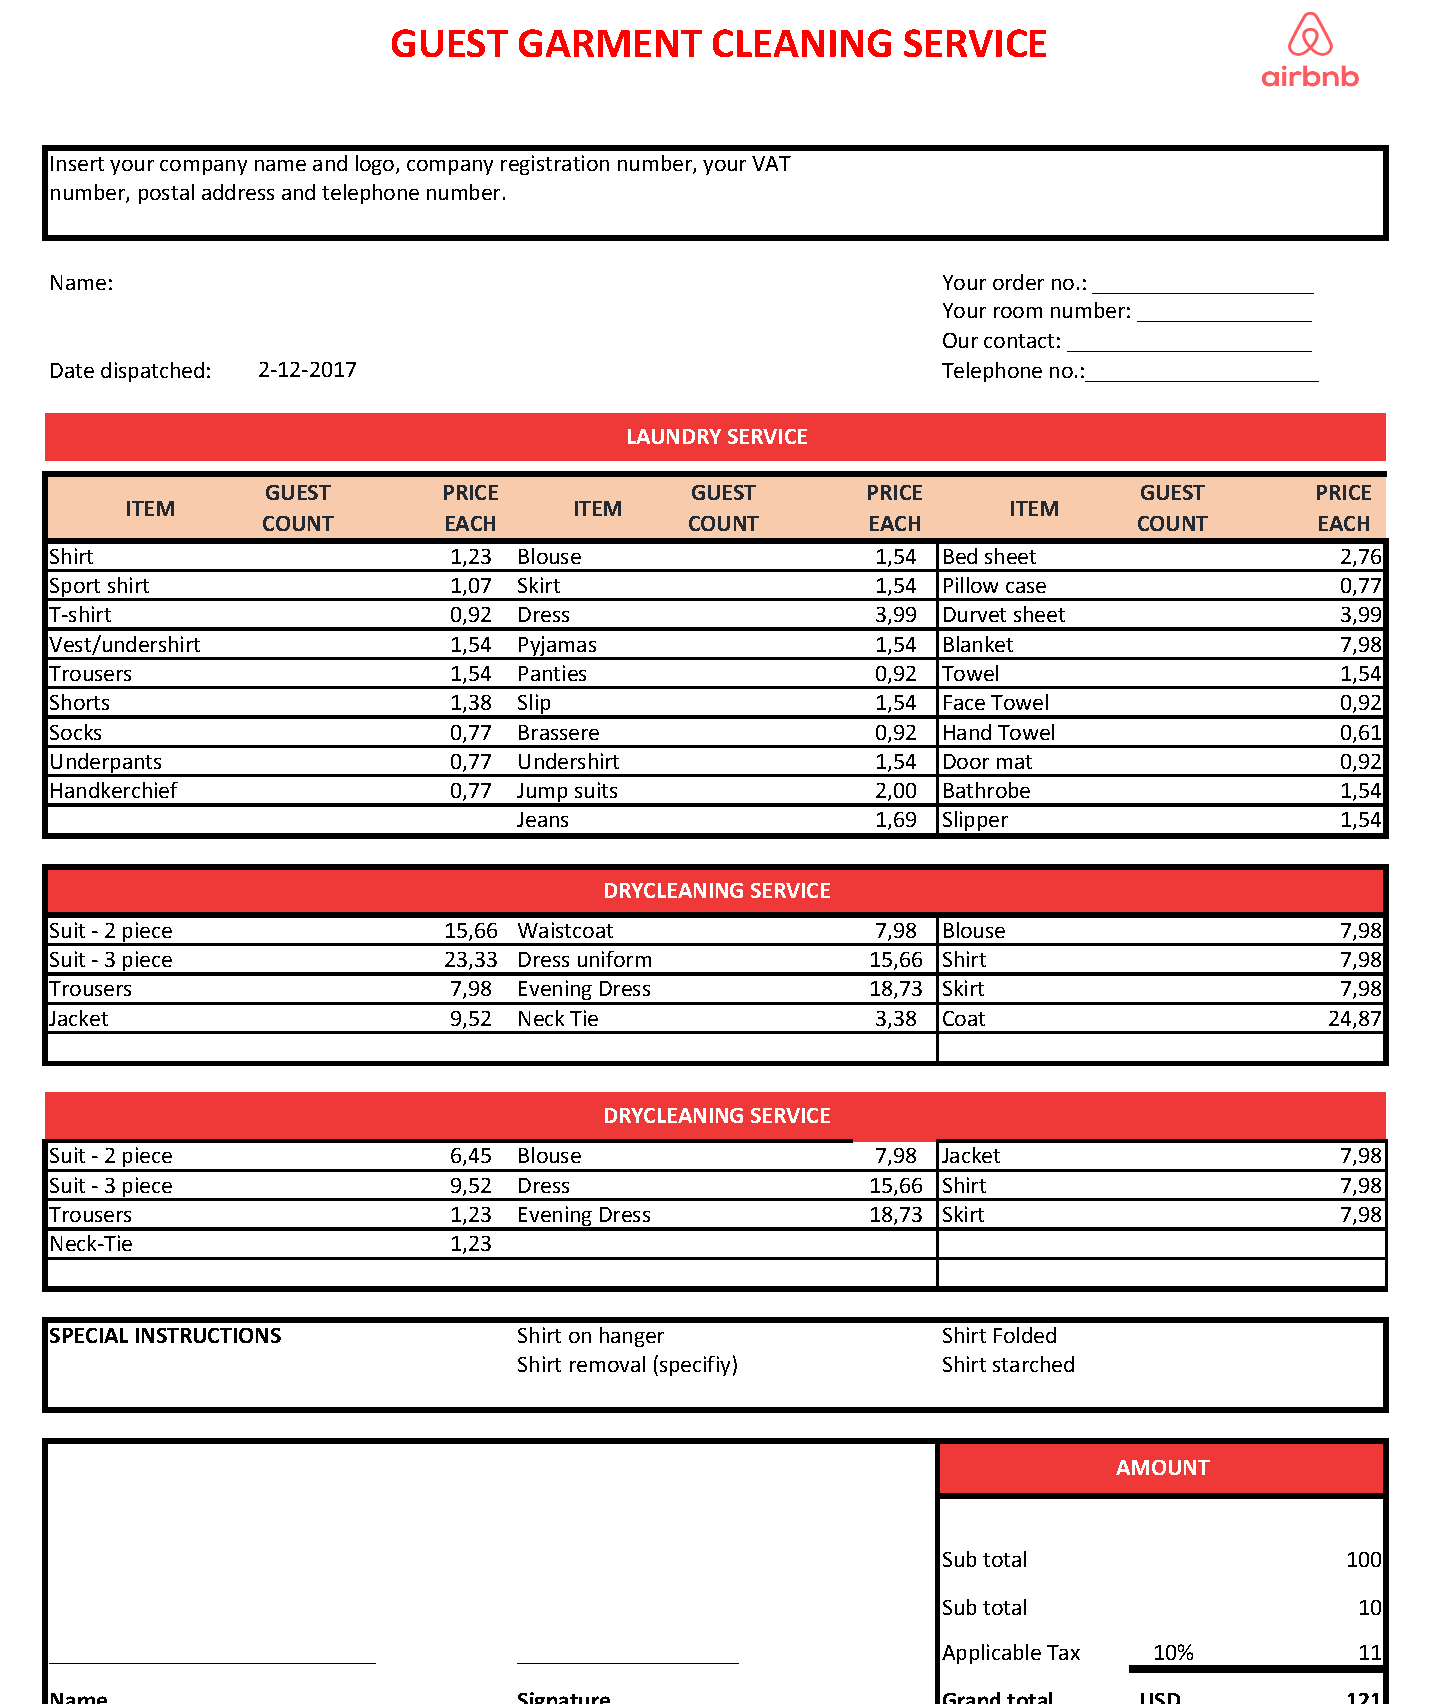 Airbnb Spreadsheet Template Pertaining To Airbnb Guest Garment Cleaning  Templates At Allbusinesstemplates